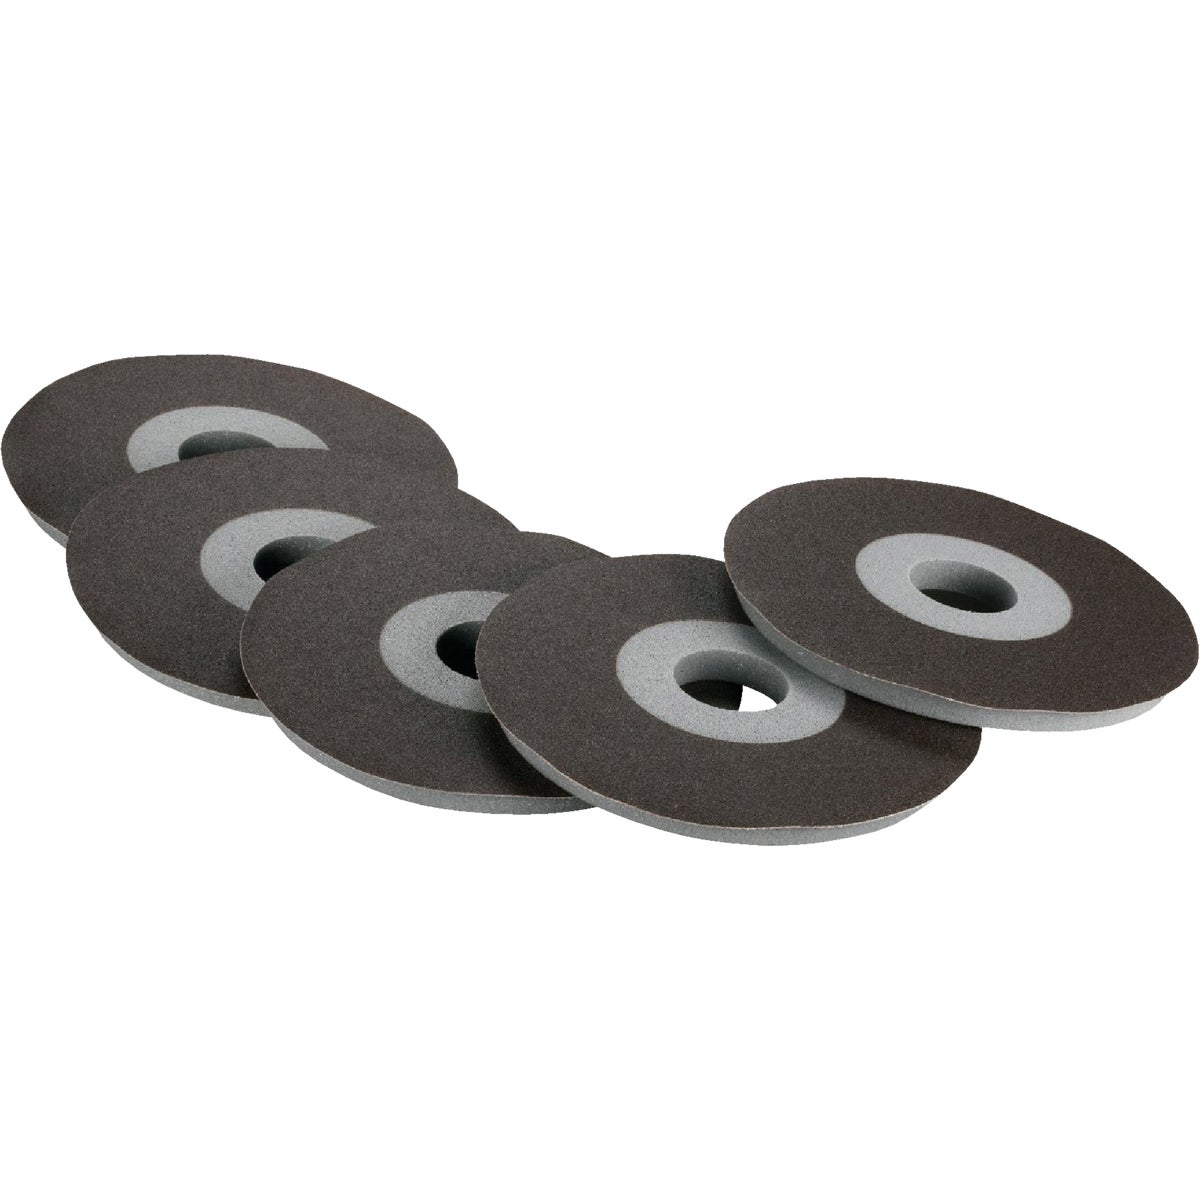 Porter Cable 8- 100 Grit Drywall Sanding Disc (5-Pack)